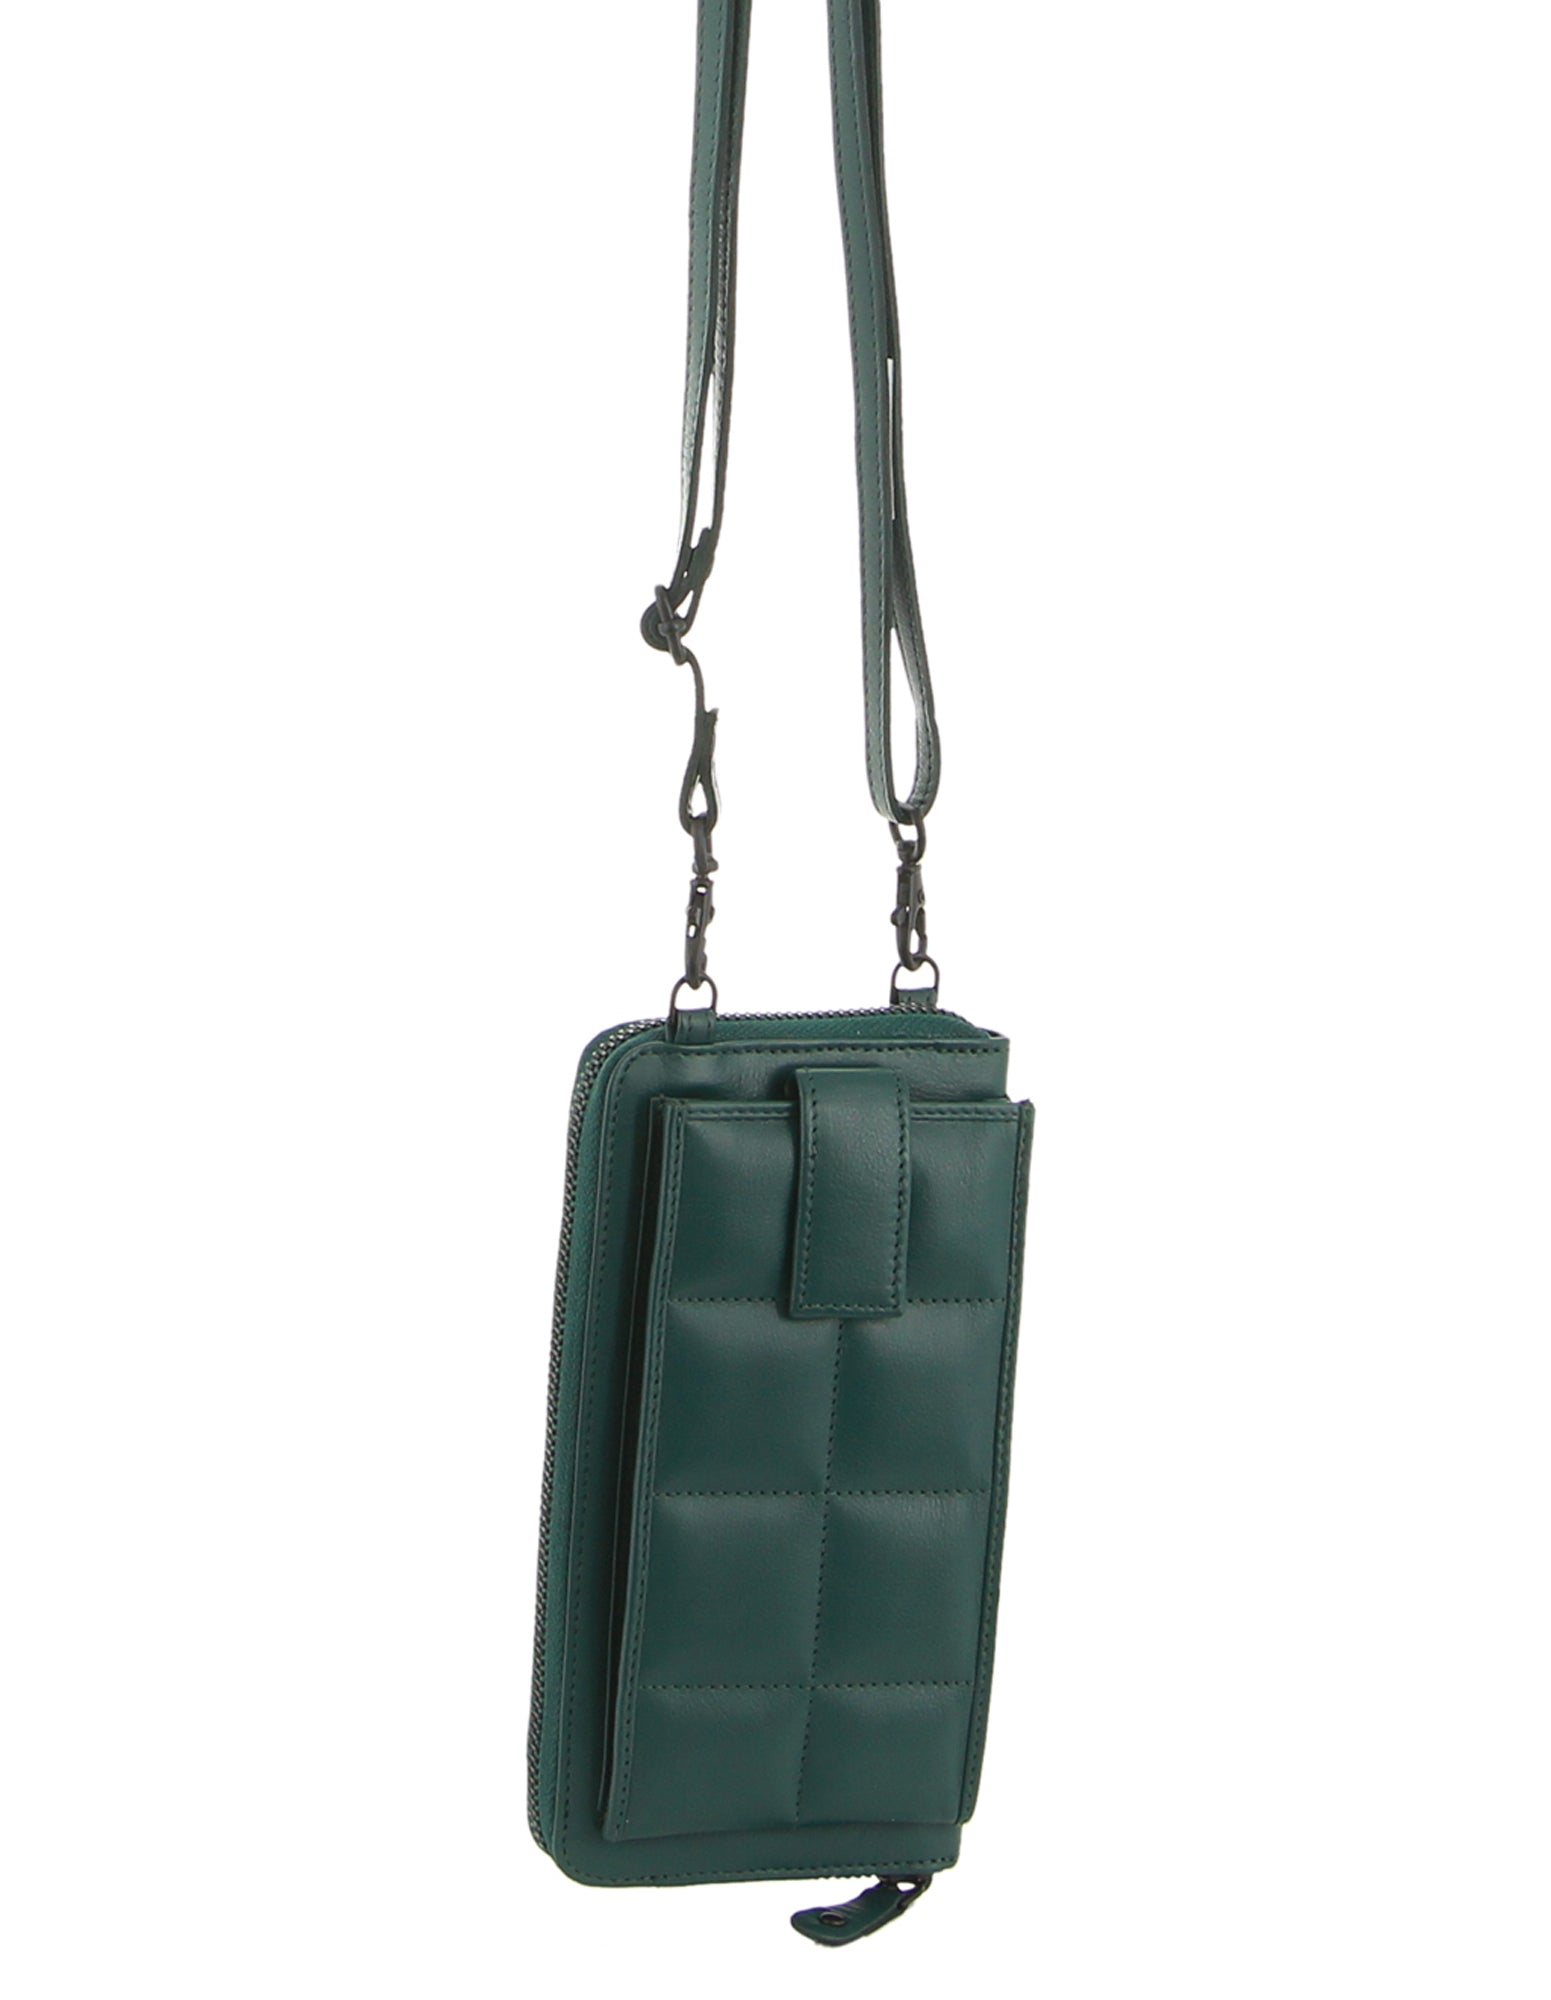 Pierre Cardin Quilted Leather Ladies Phone/Wallet Bag in Teal